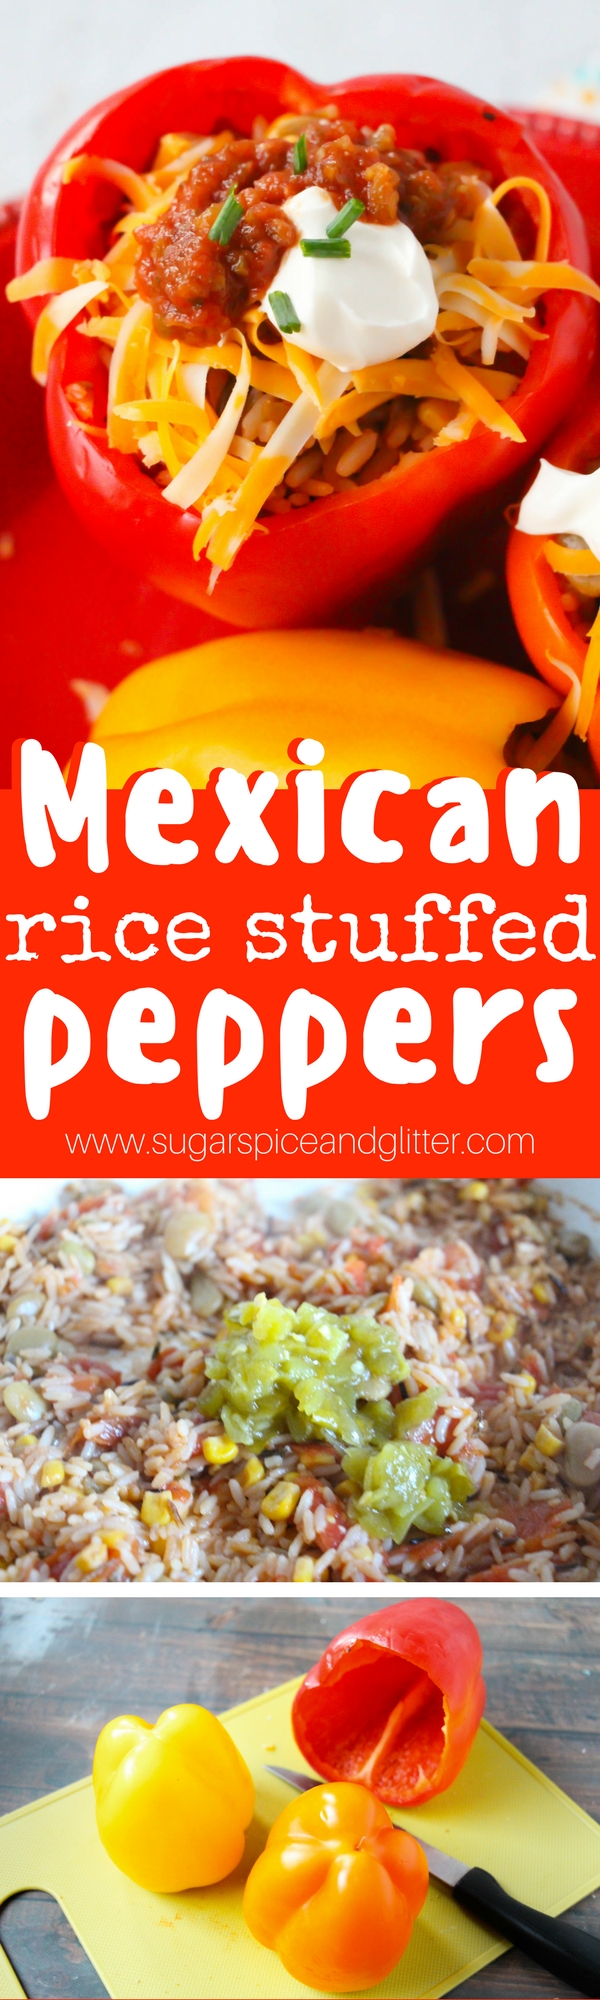 Flavorful Mexican rice stuffed peppers - a meatless supper idea kids will love and a delicious alternative to Taco Tuesday!